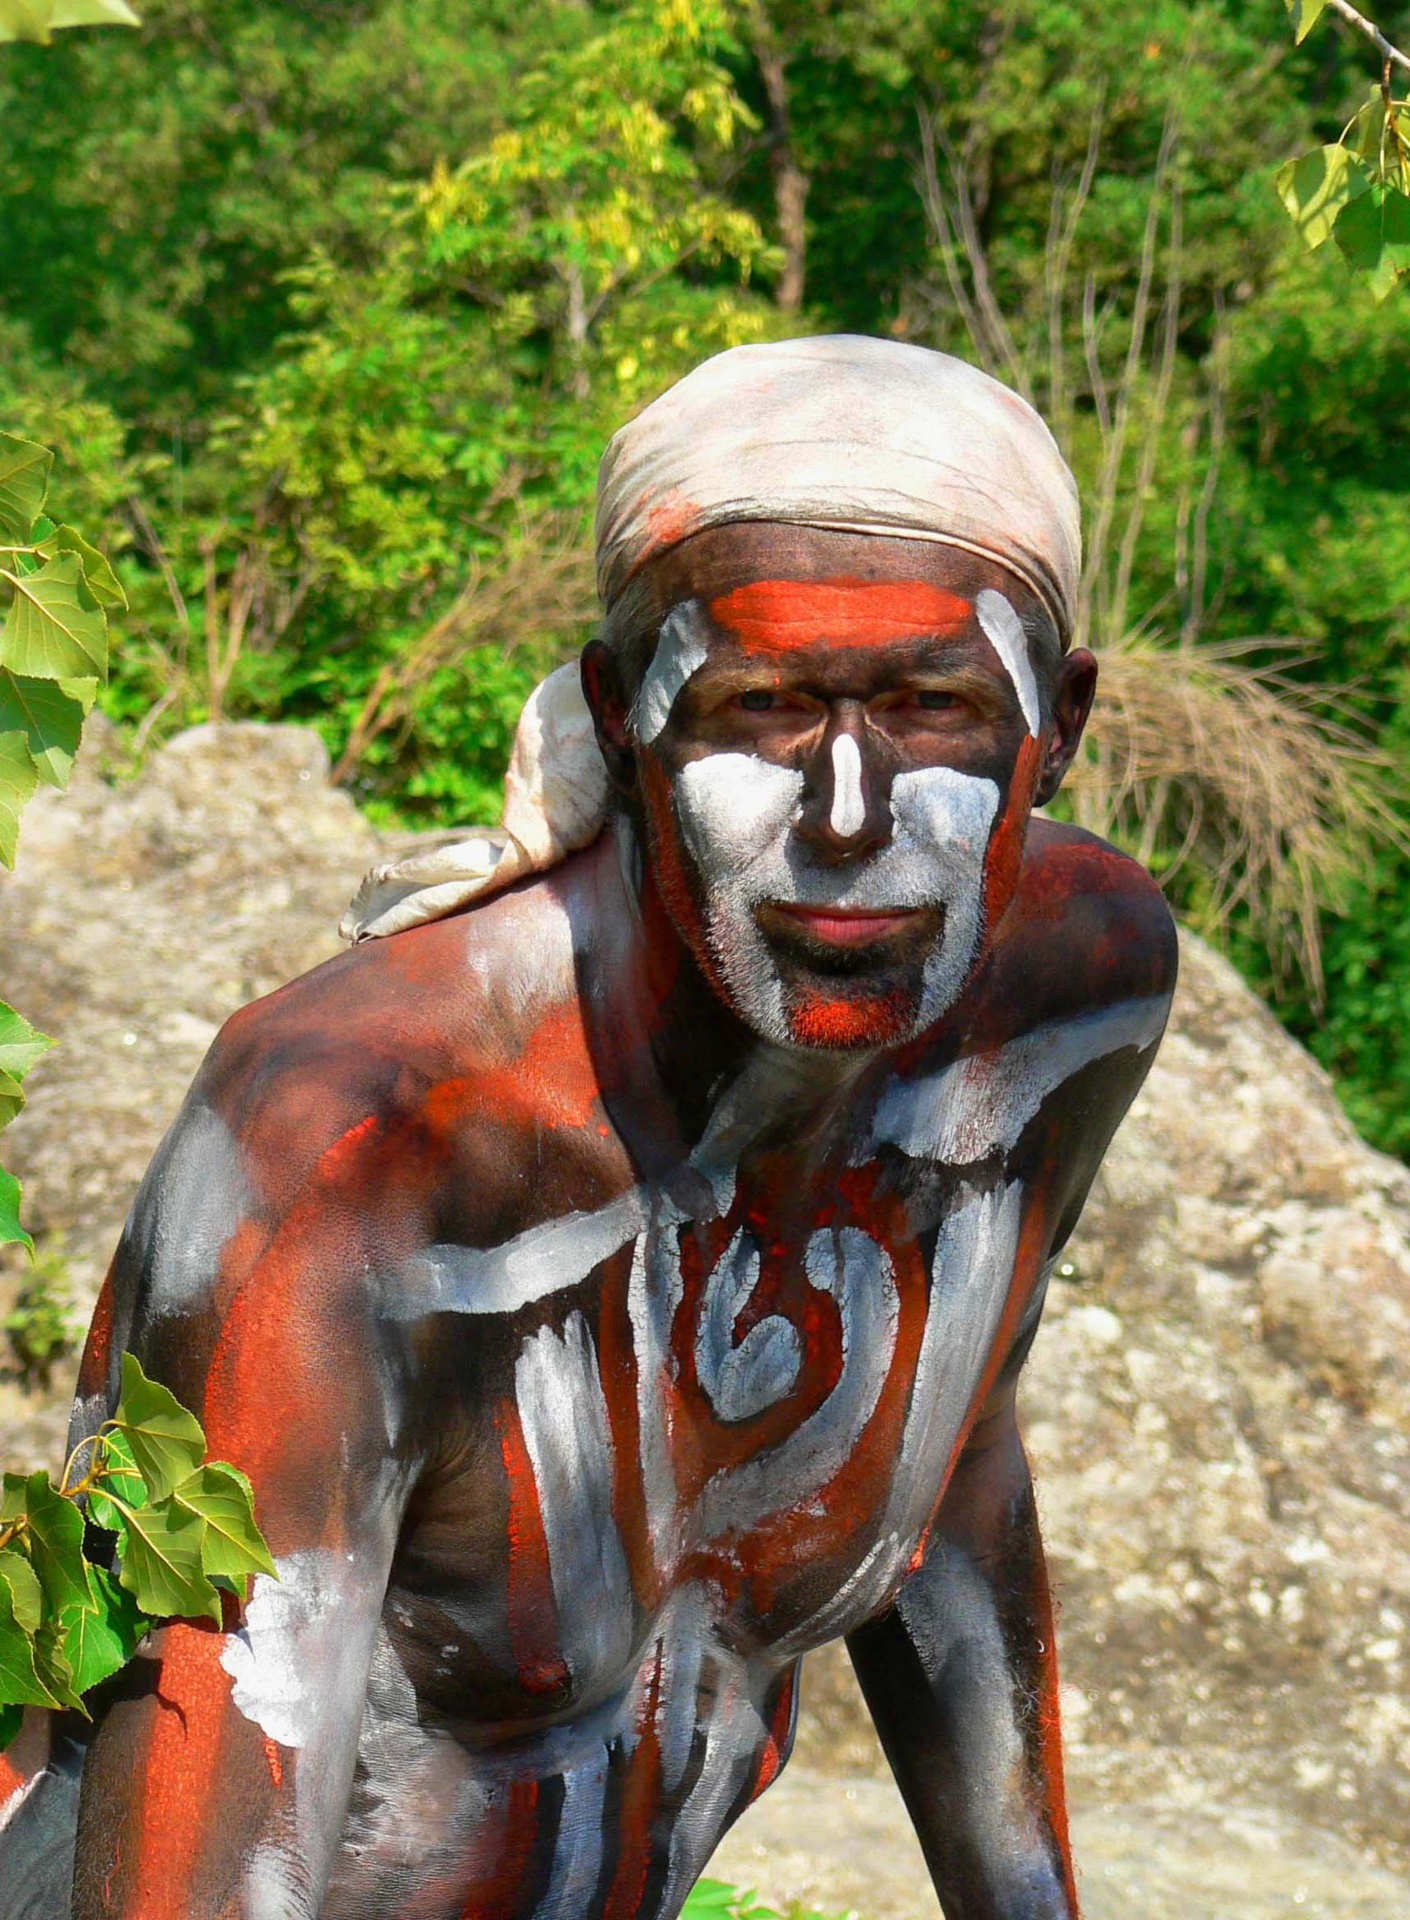 Man body painting wild nature shaman shamanism vision quest trance dance face red esoteric ritual psychology therapy religion god spirituality seminar initiation ceremony tribe wilderness chief chief coach power Australia